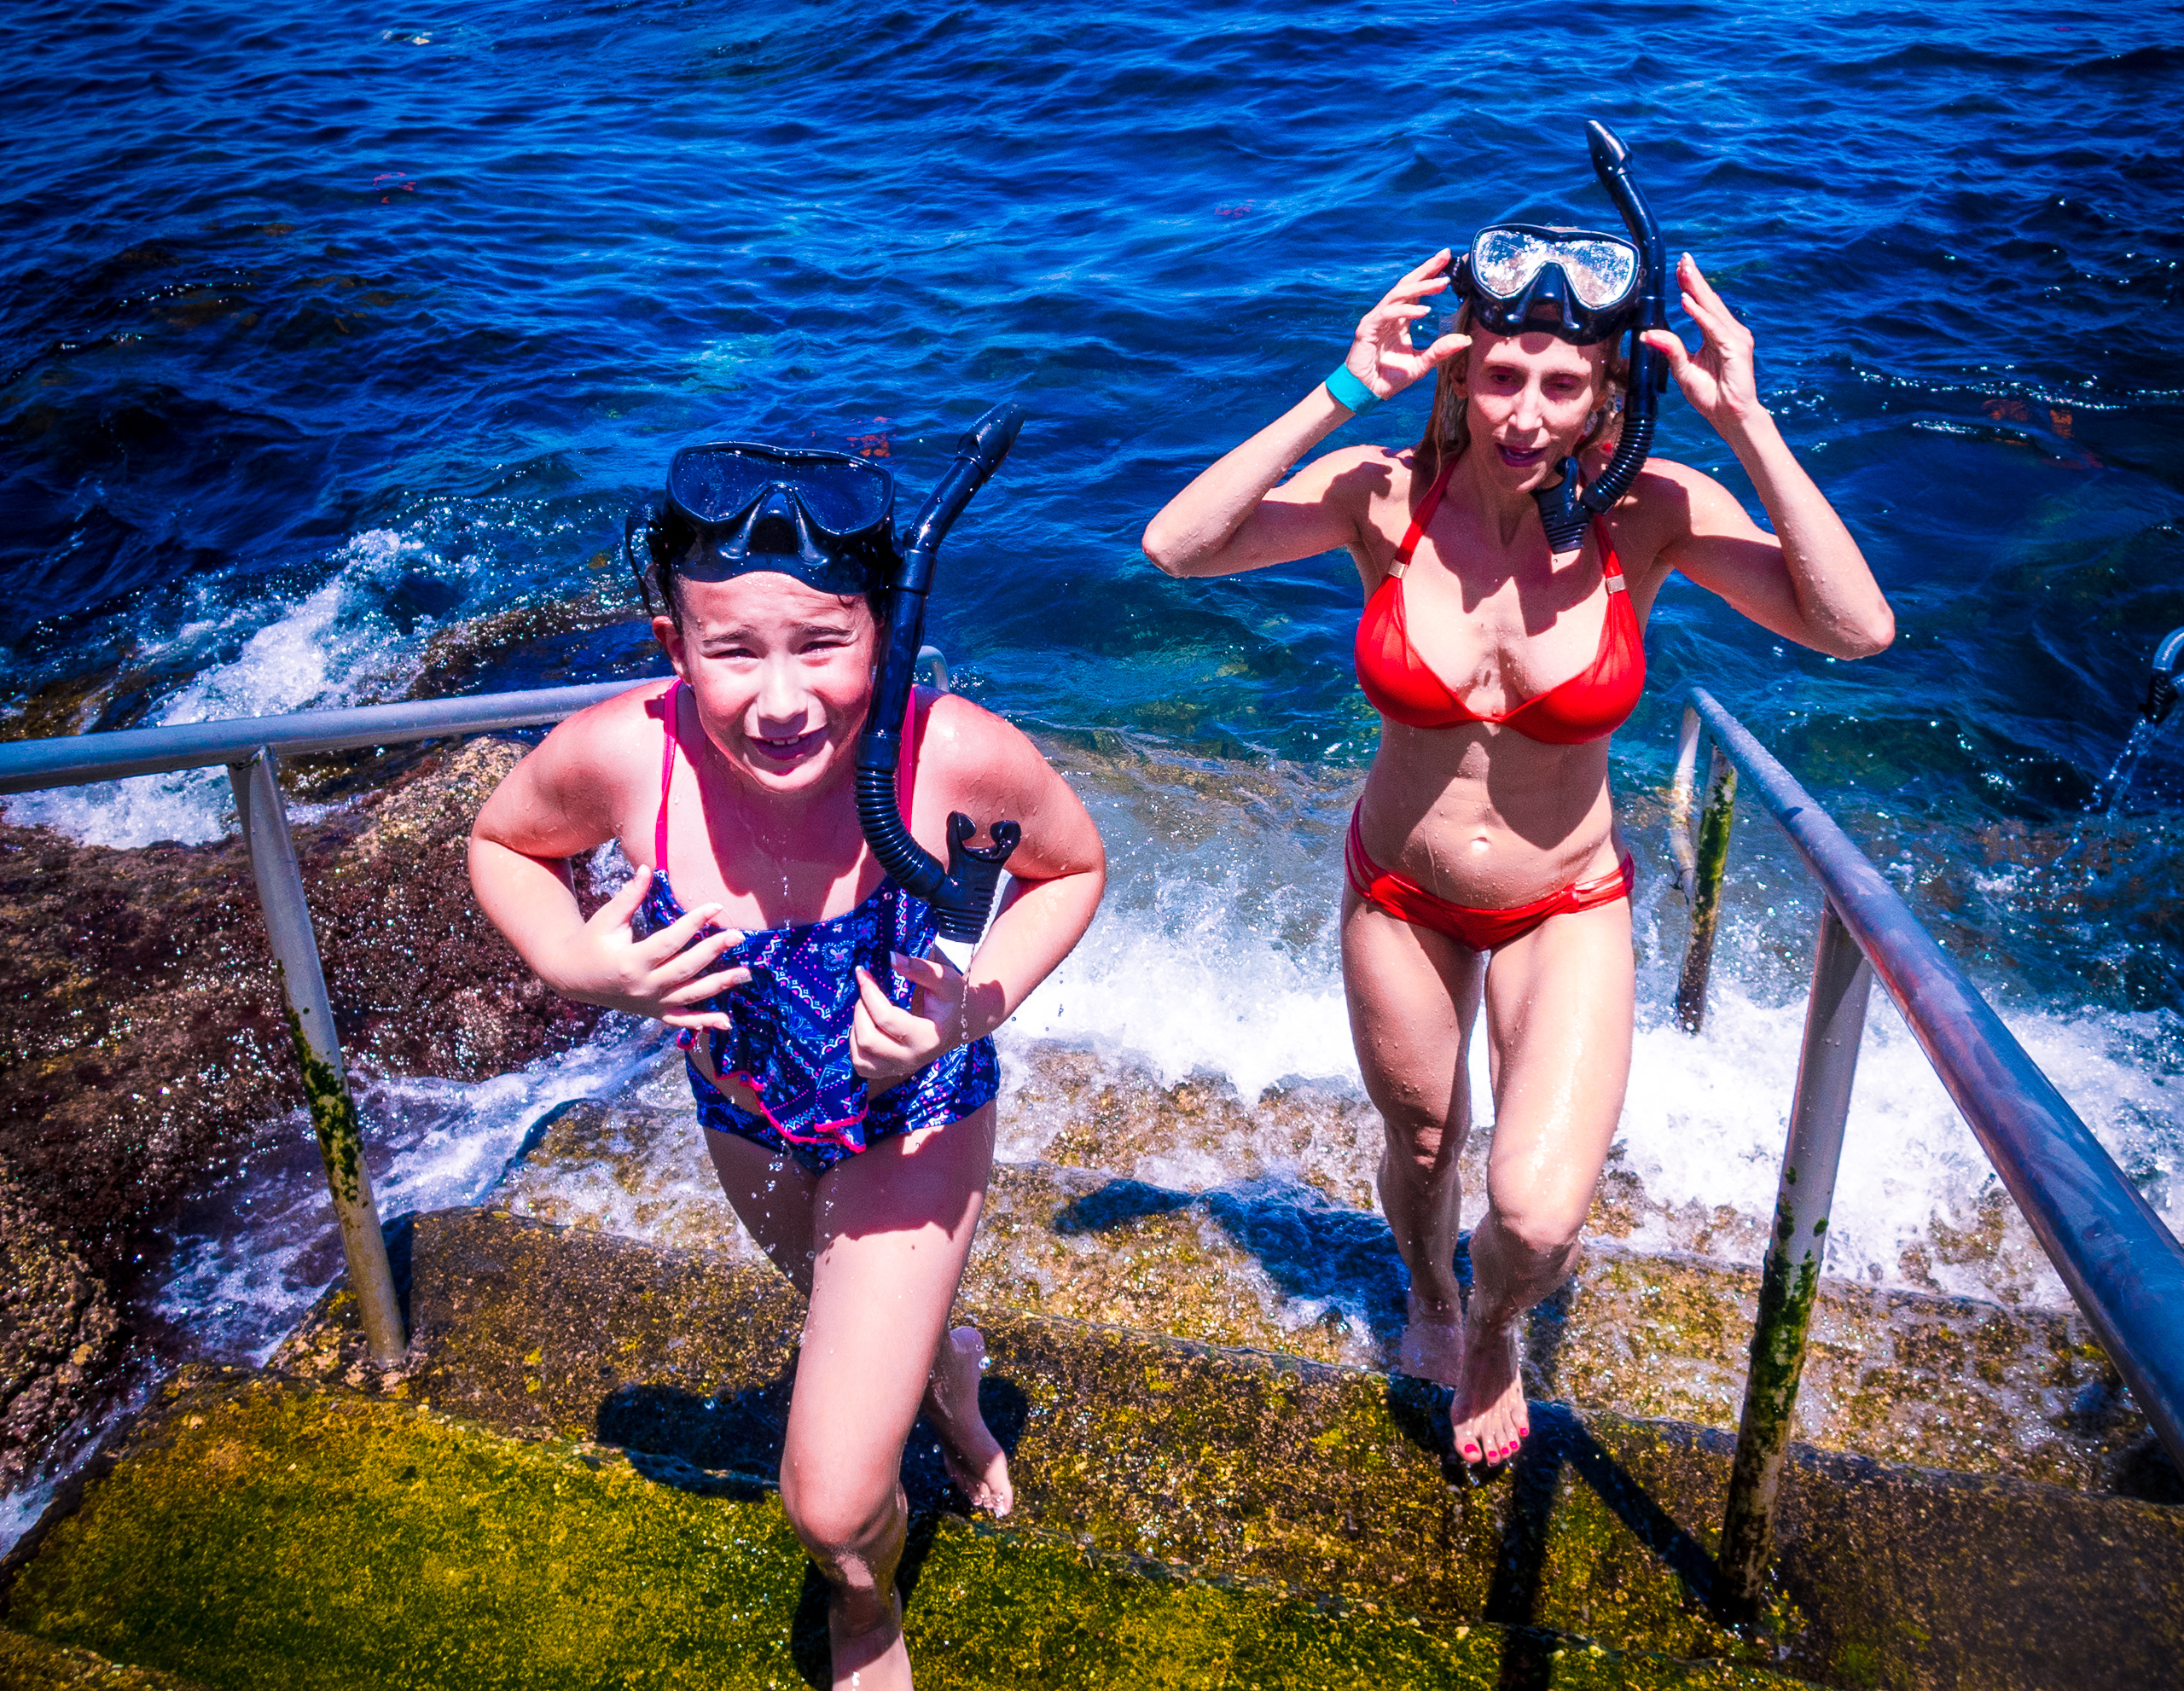 a family friend takes a young girl on her 1st snorkeling experience at the Casino Steps in Avalon, Catalina, Channel Islands, Los Angeles, California